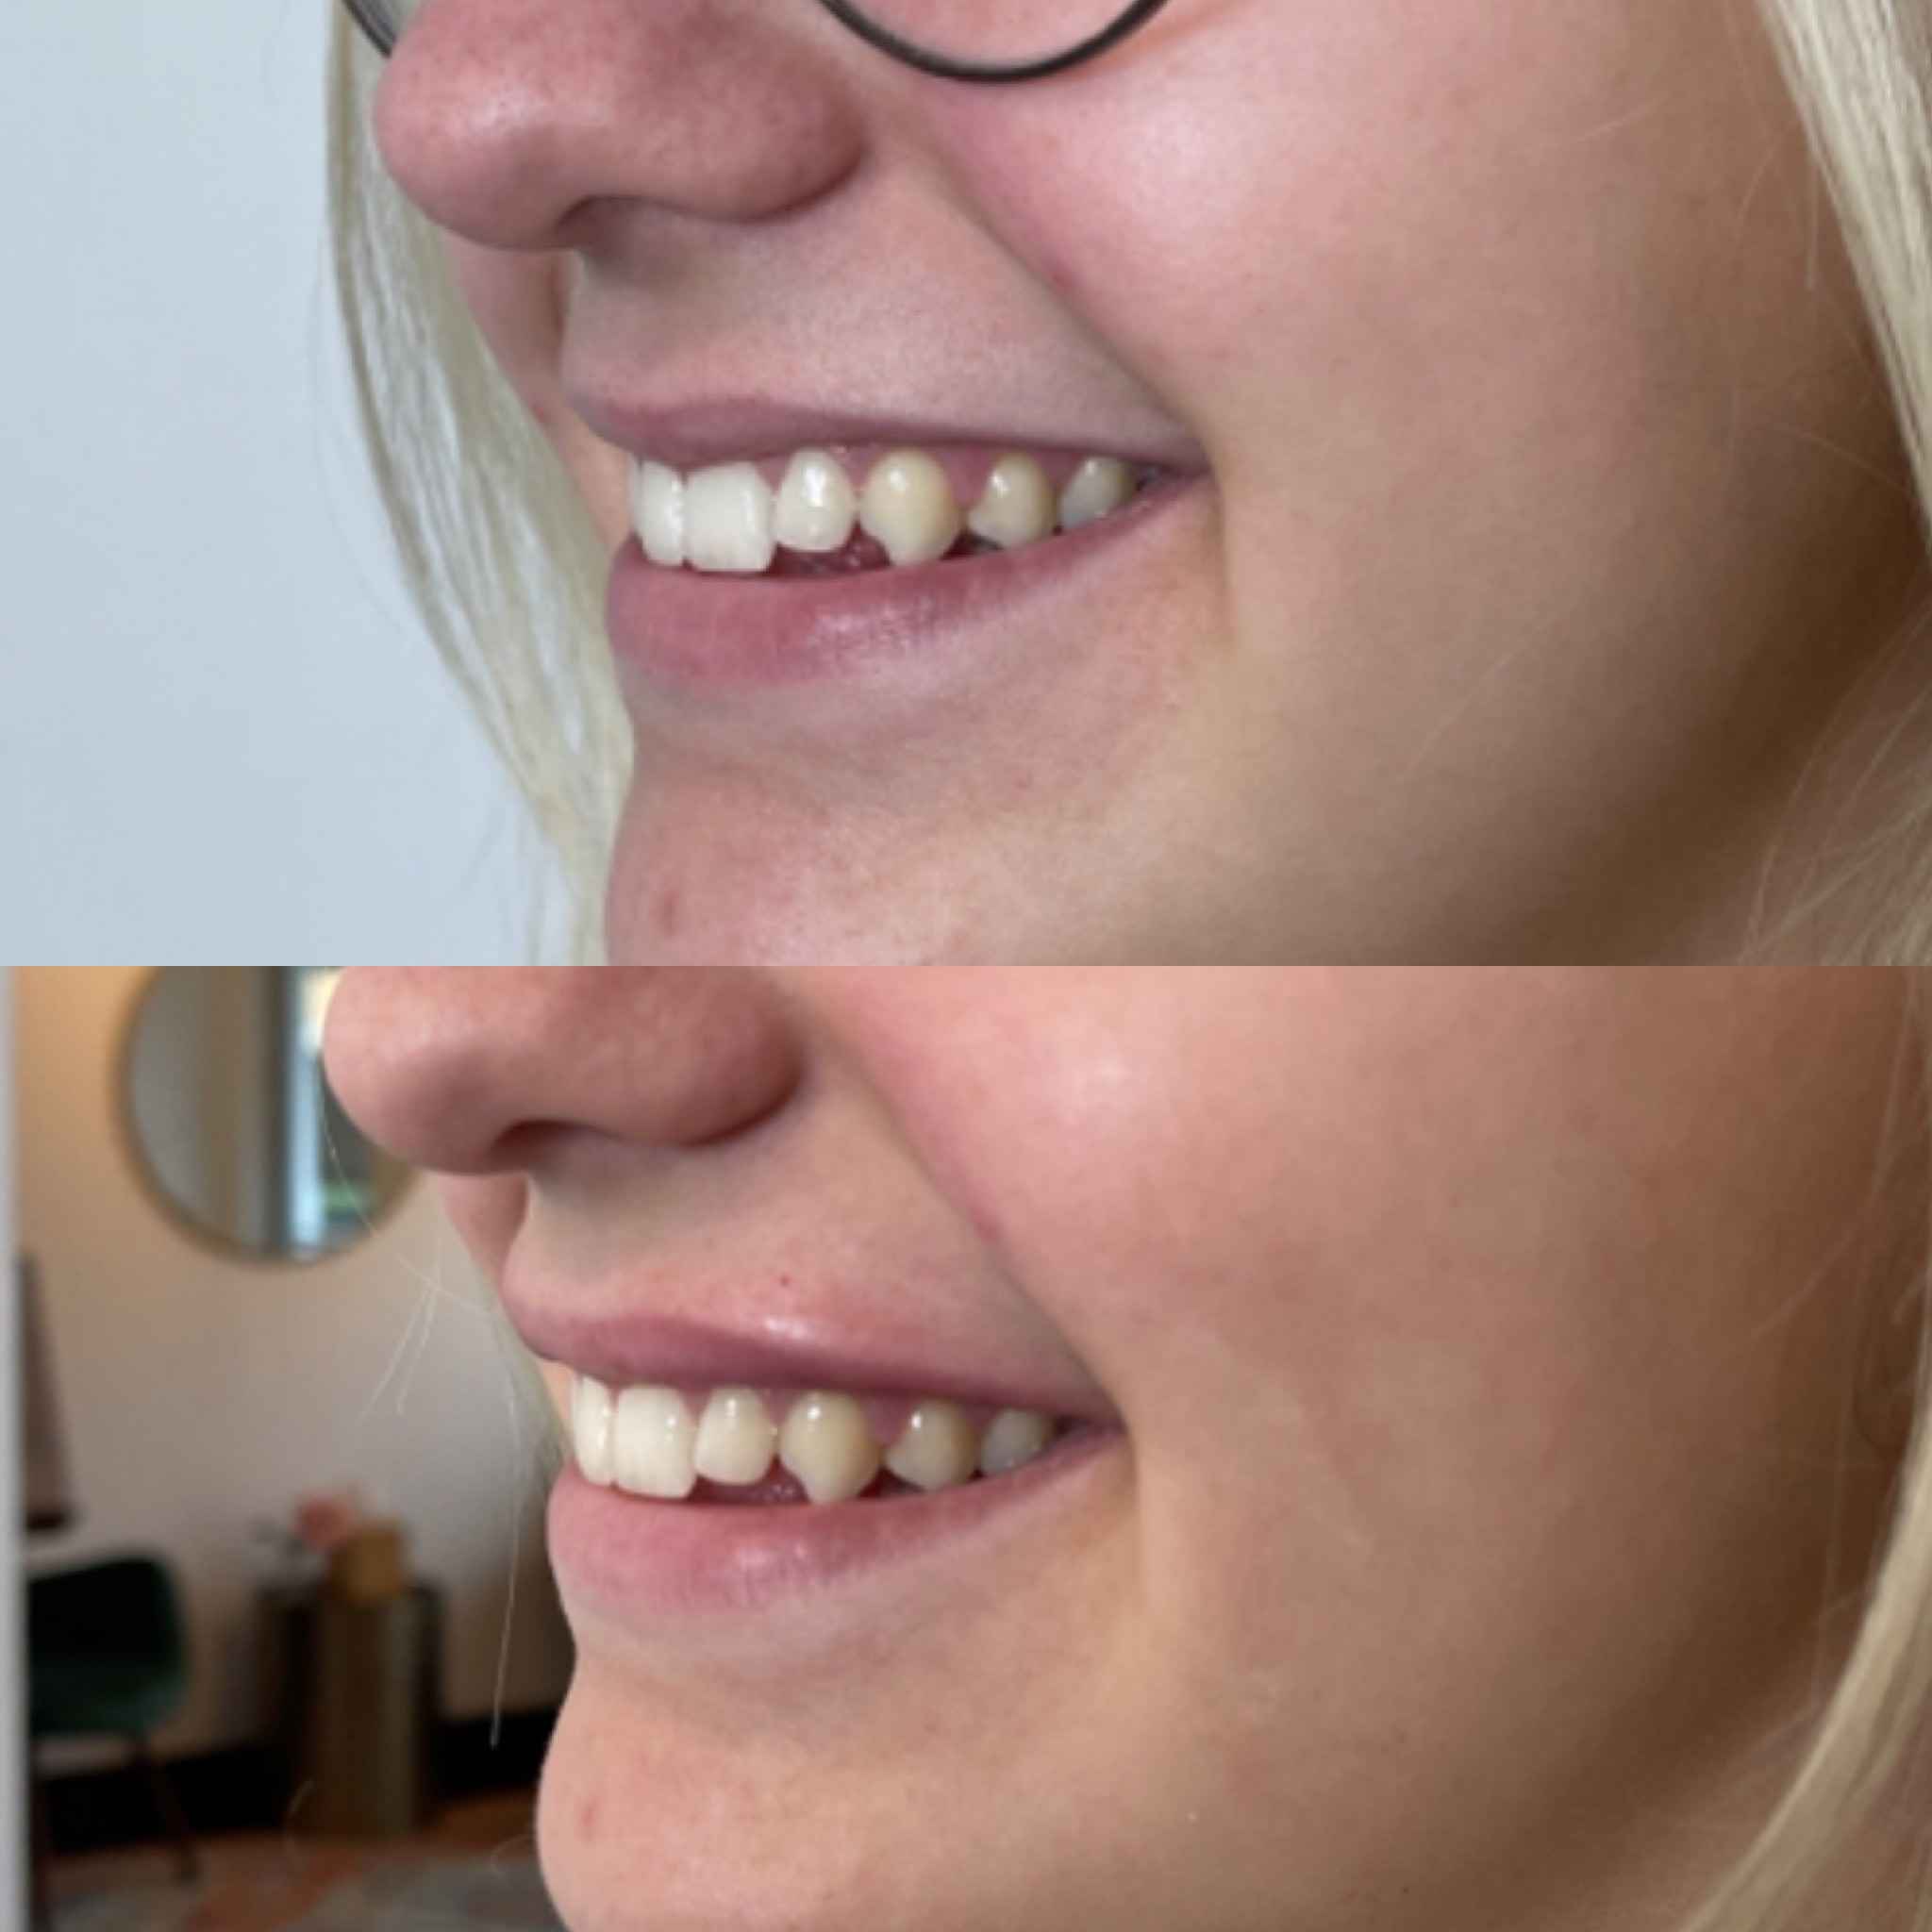 Before & After Fillers Treatment Results in Smile | Onyx Medical Aesthetics | Homann Dr. S.E. suite B Lacey, WA